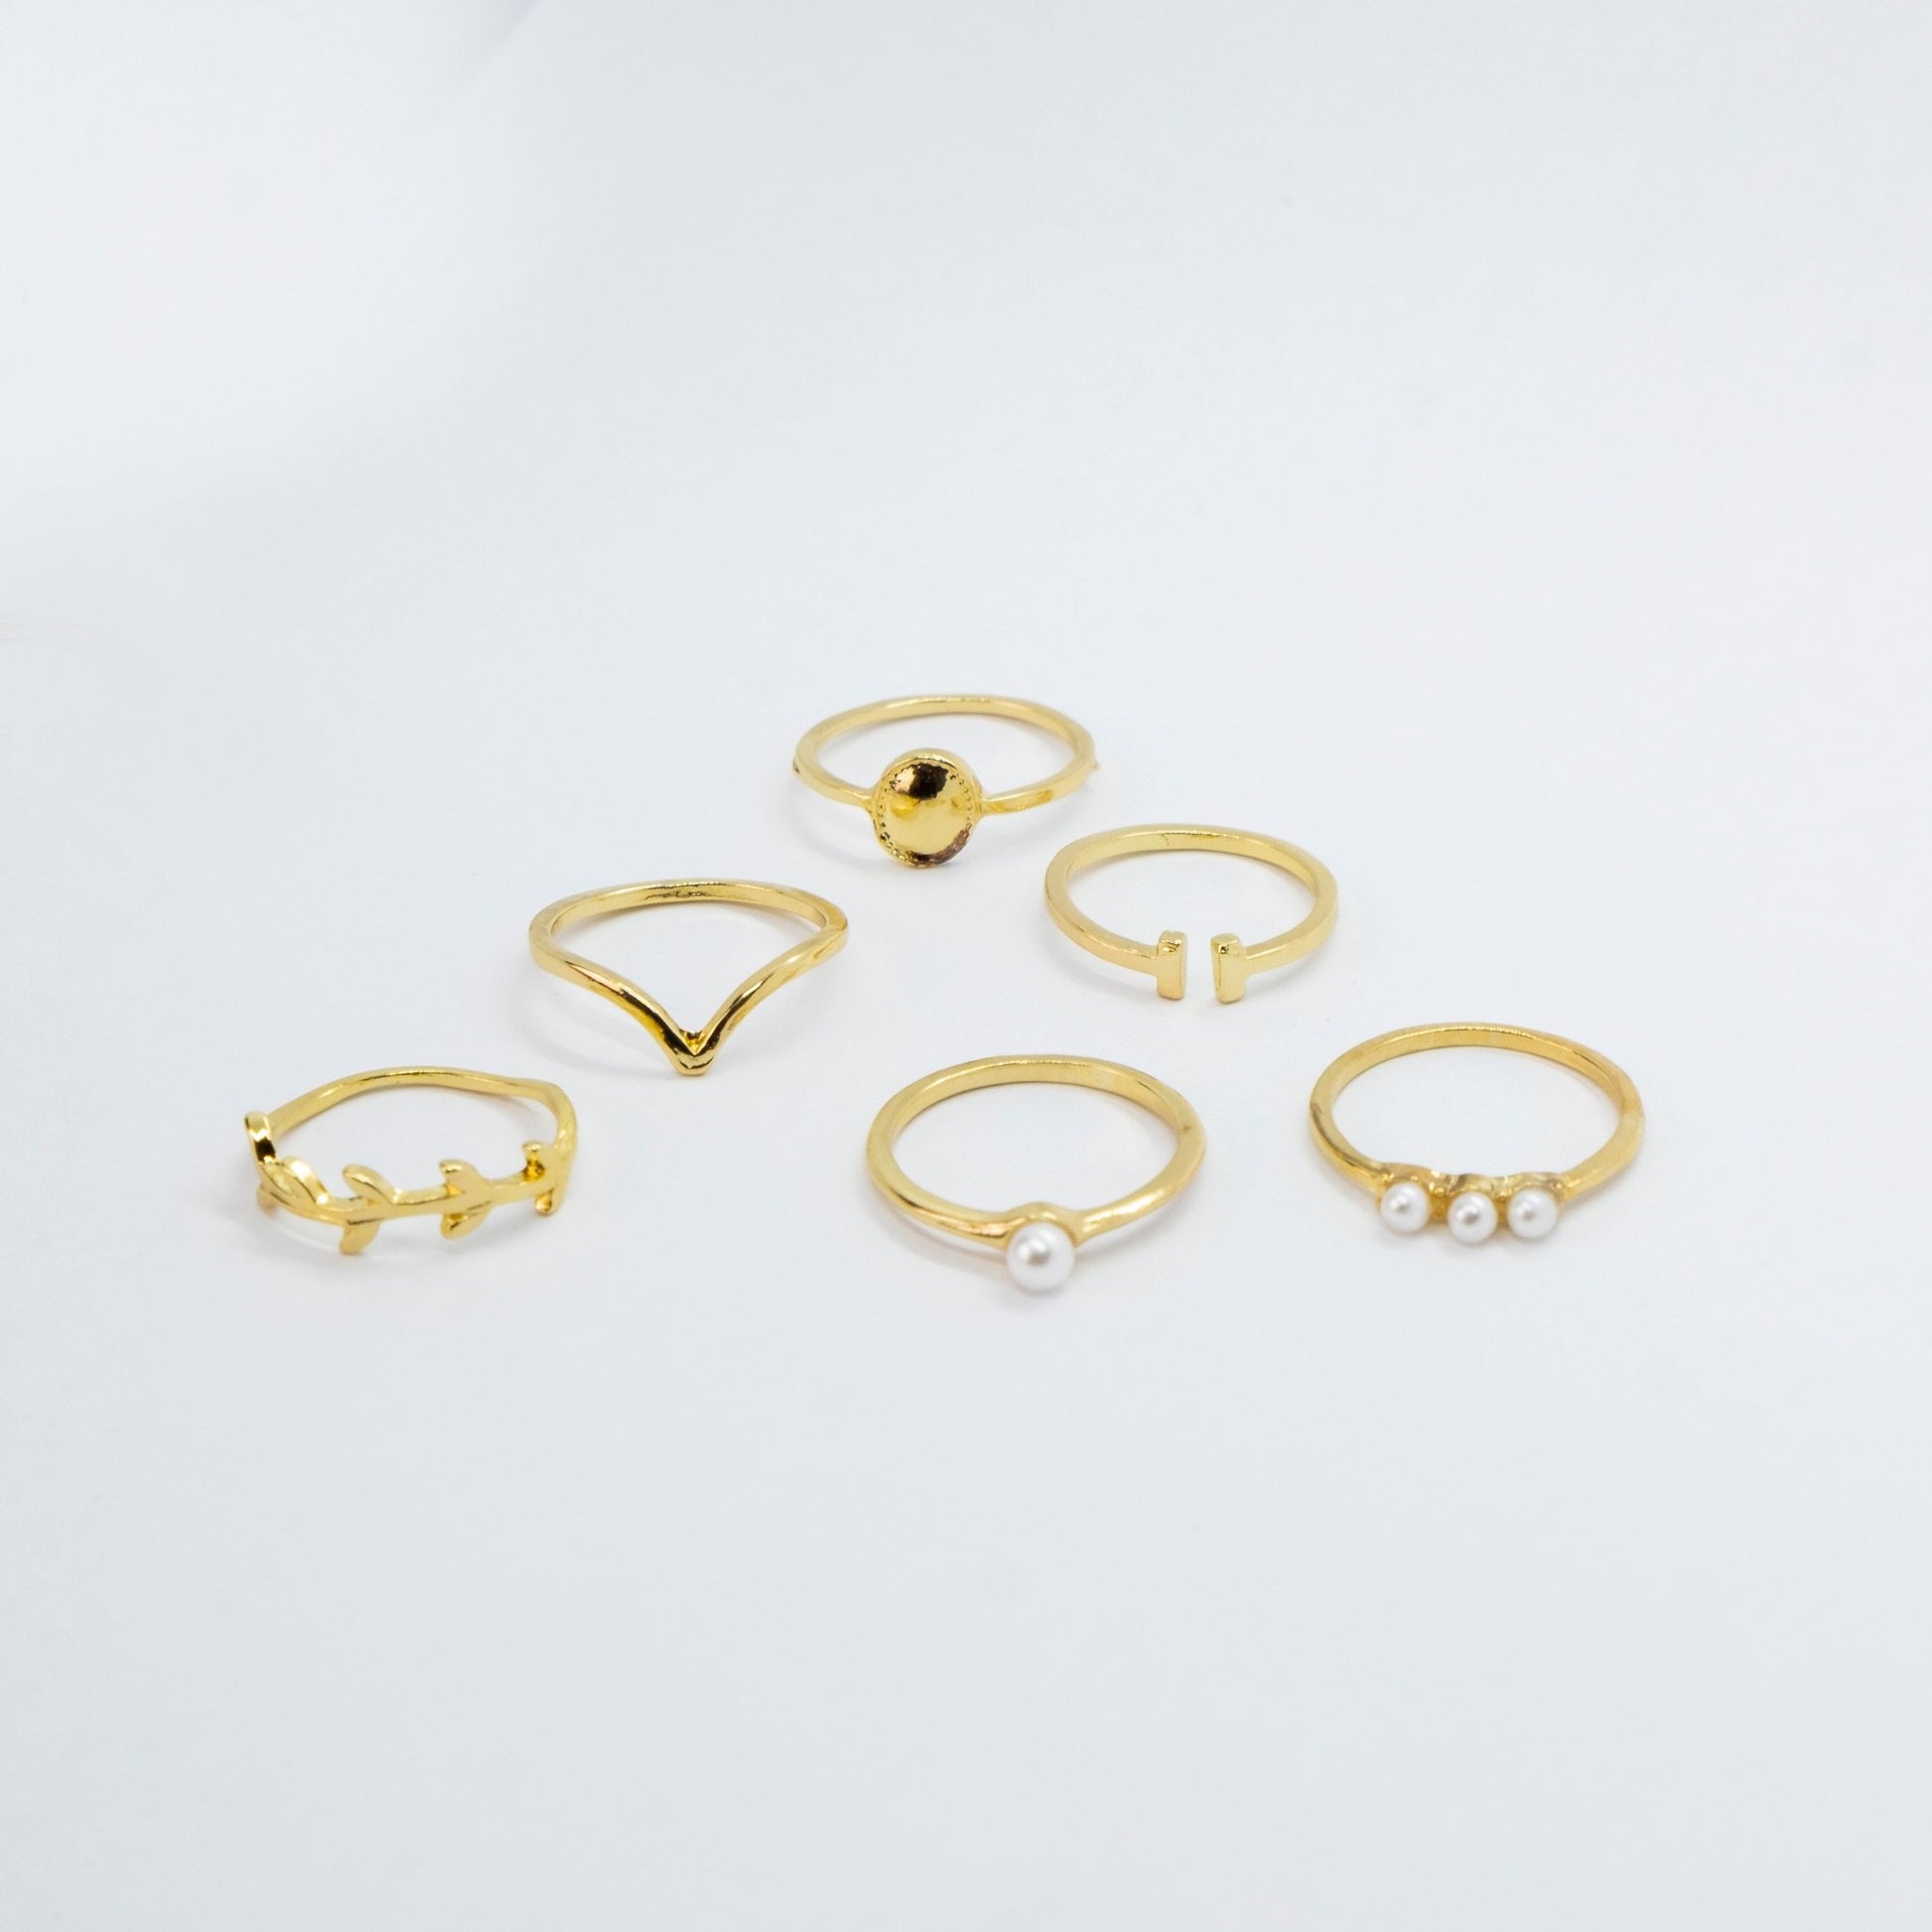 6 Piece Gold Plated Oxidised Bohemian Vintage Tribal Stacking Retro Ring Set